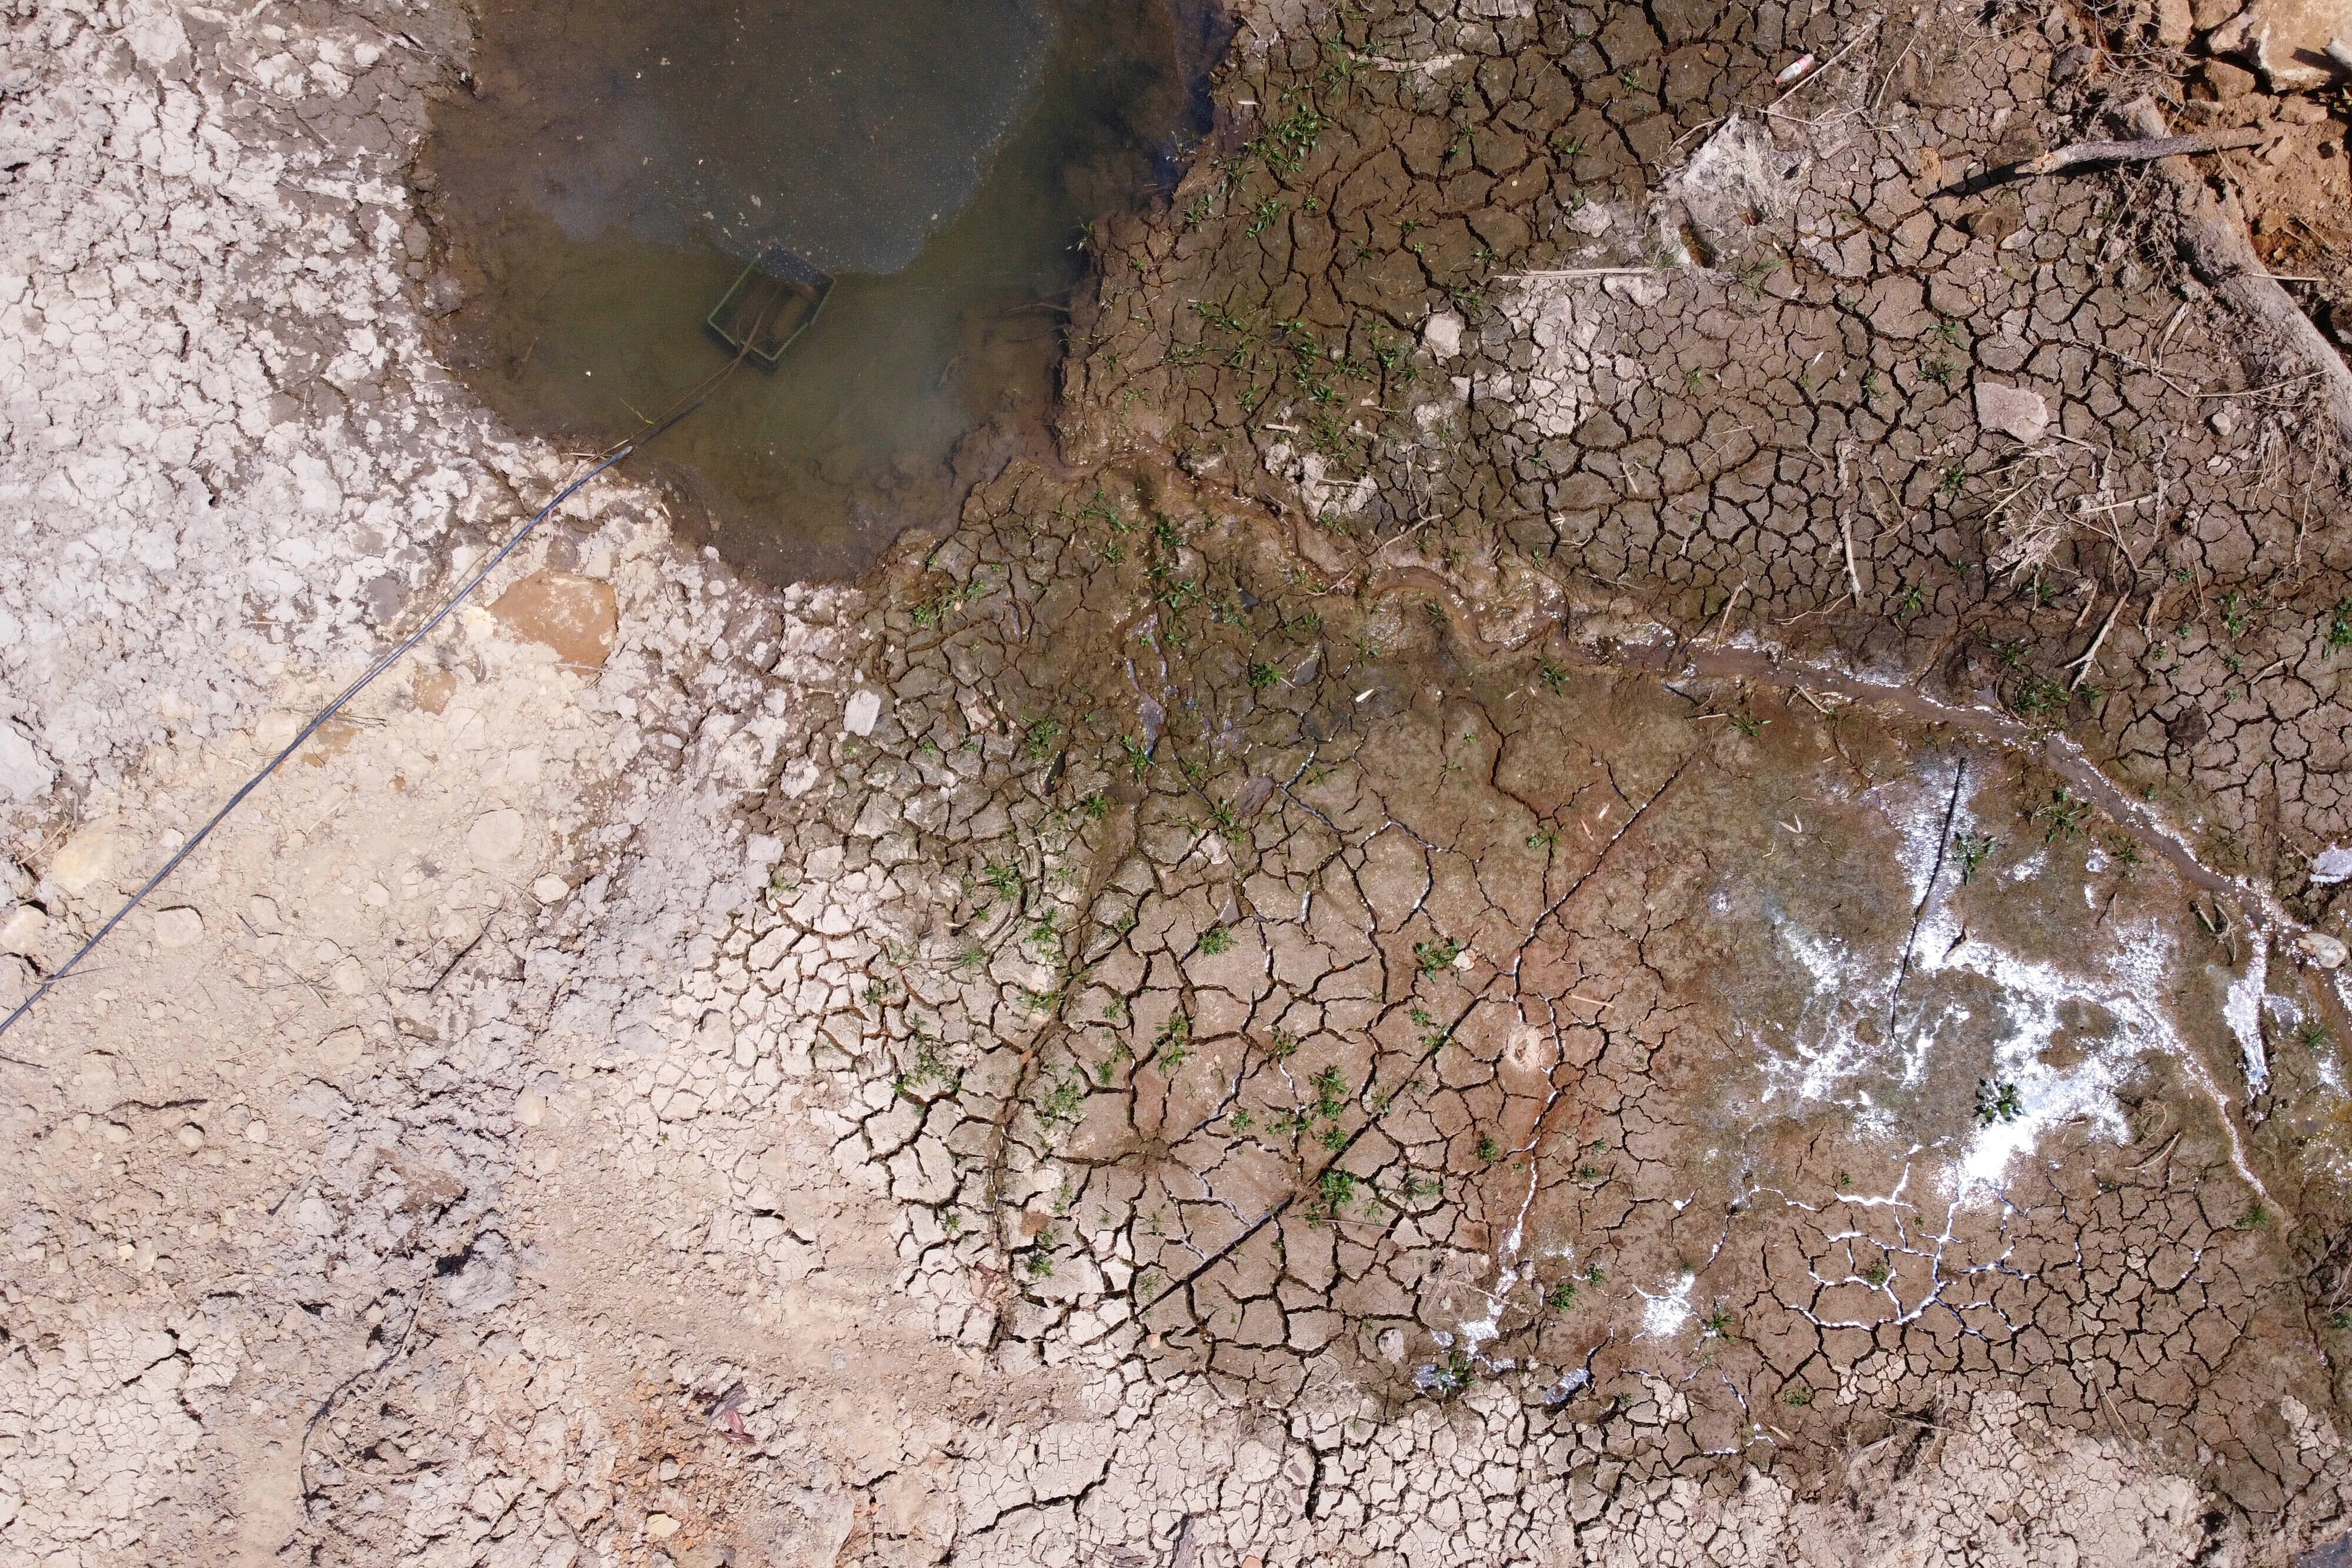 A dried-out reservoir in Longquan village in Chongqing on August 20. (Photo: Olivia Zhang, AP)